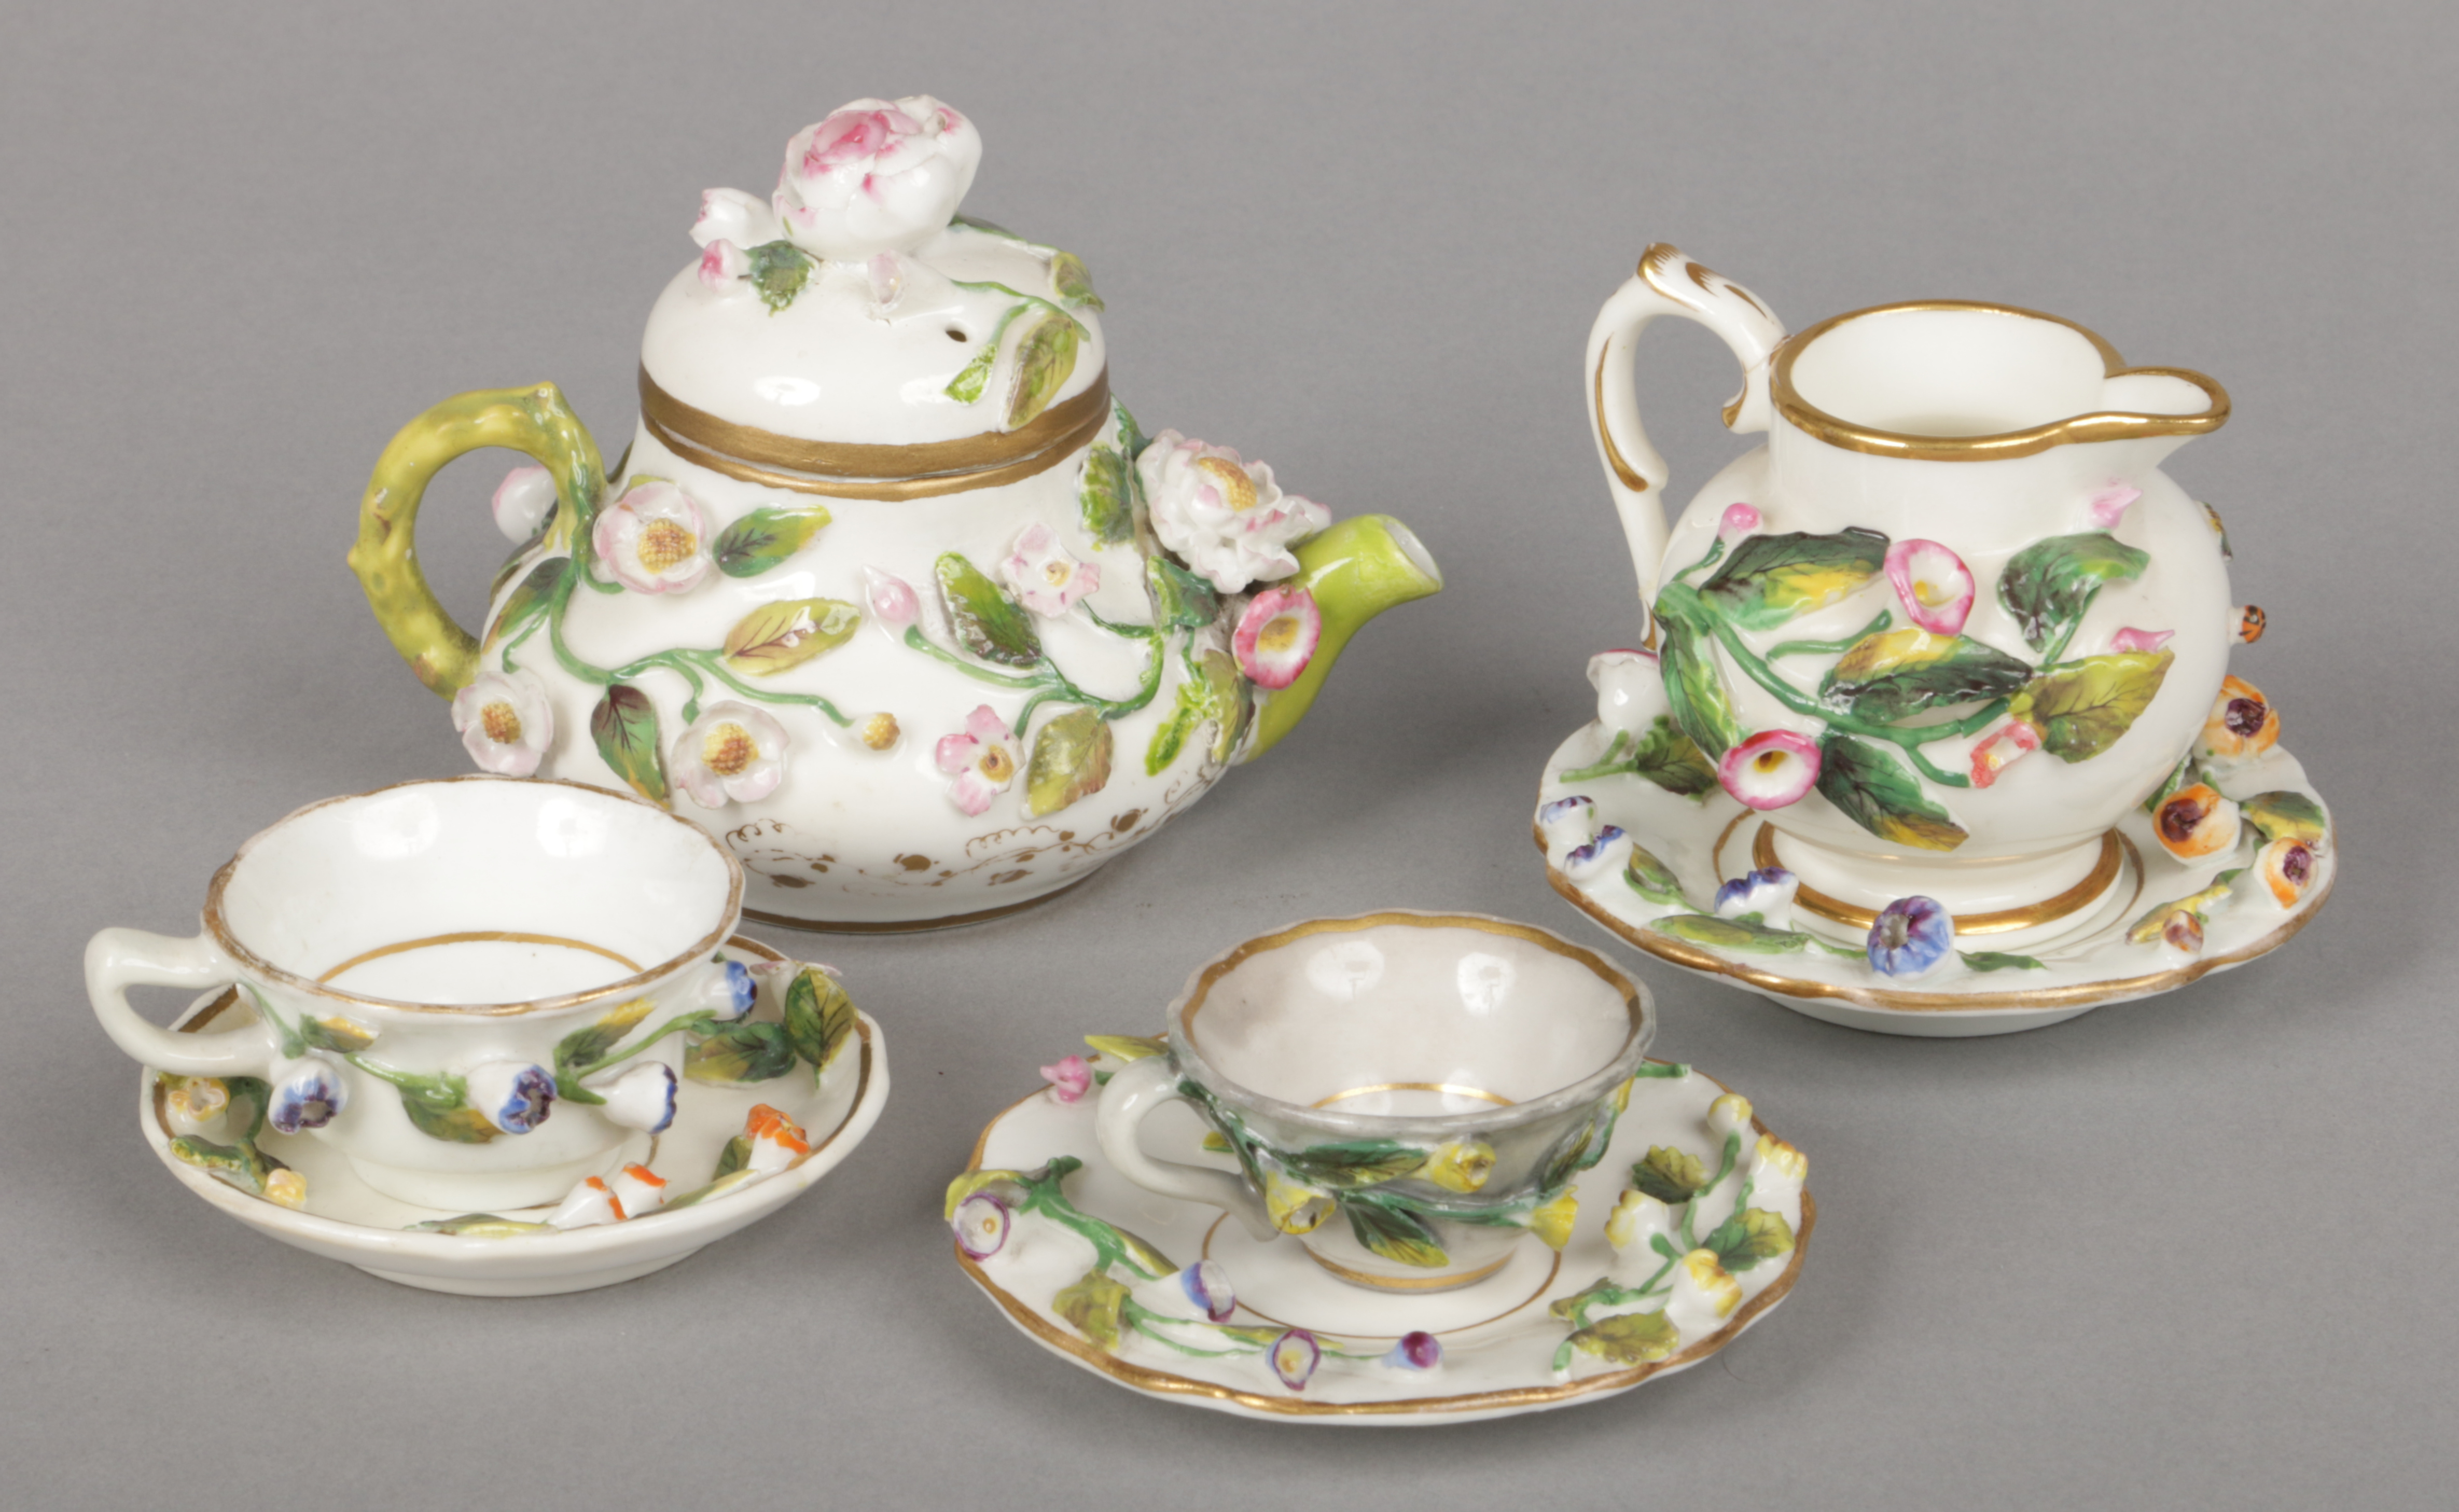 An assembled Rockingham miniature part teaset. Each piece gilded and decorated with applied